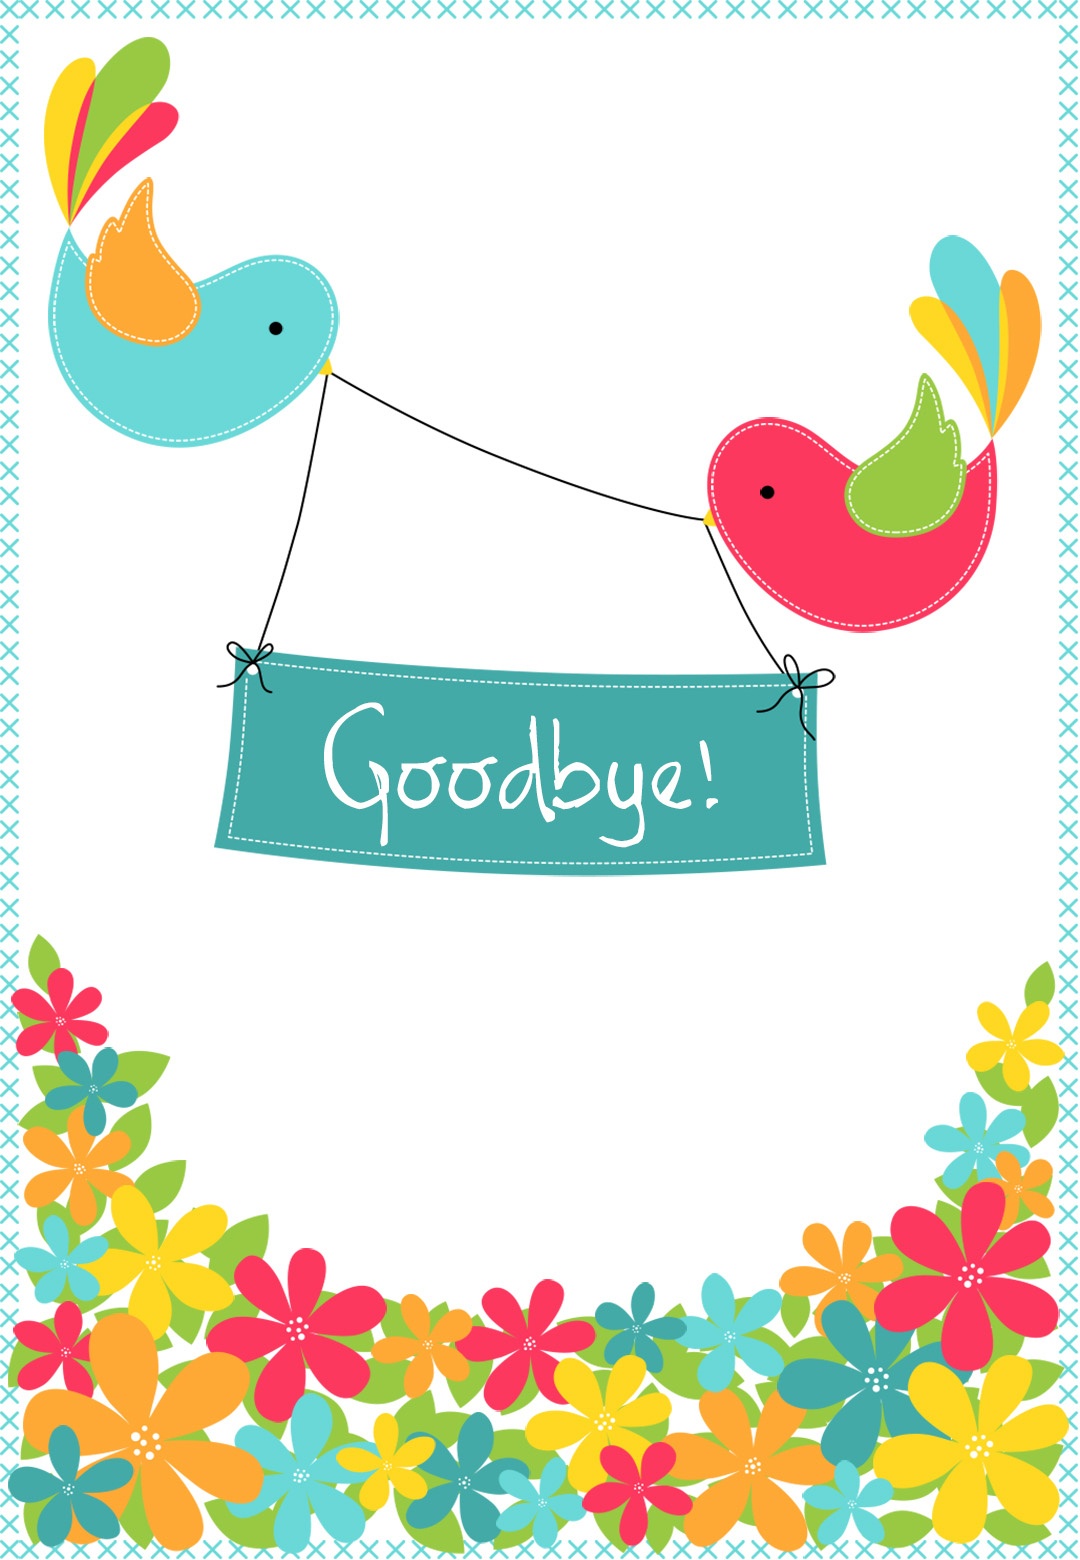 Goodbye From Your Colleagues - Good Luck Card (Free) | Greetings Island - Free Printable Good Luck Cards